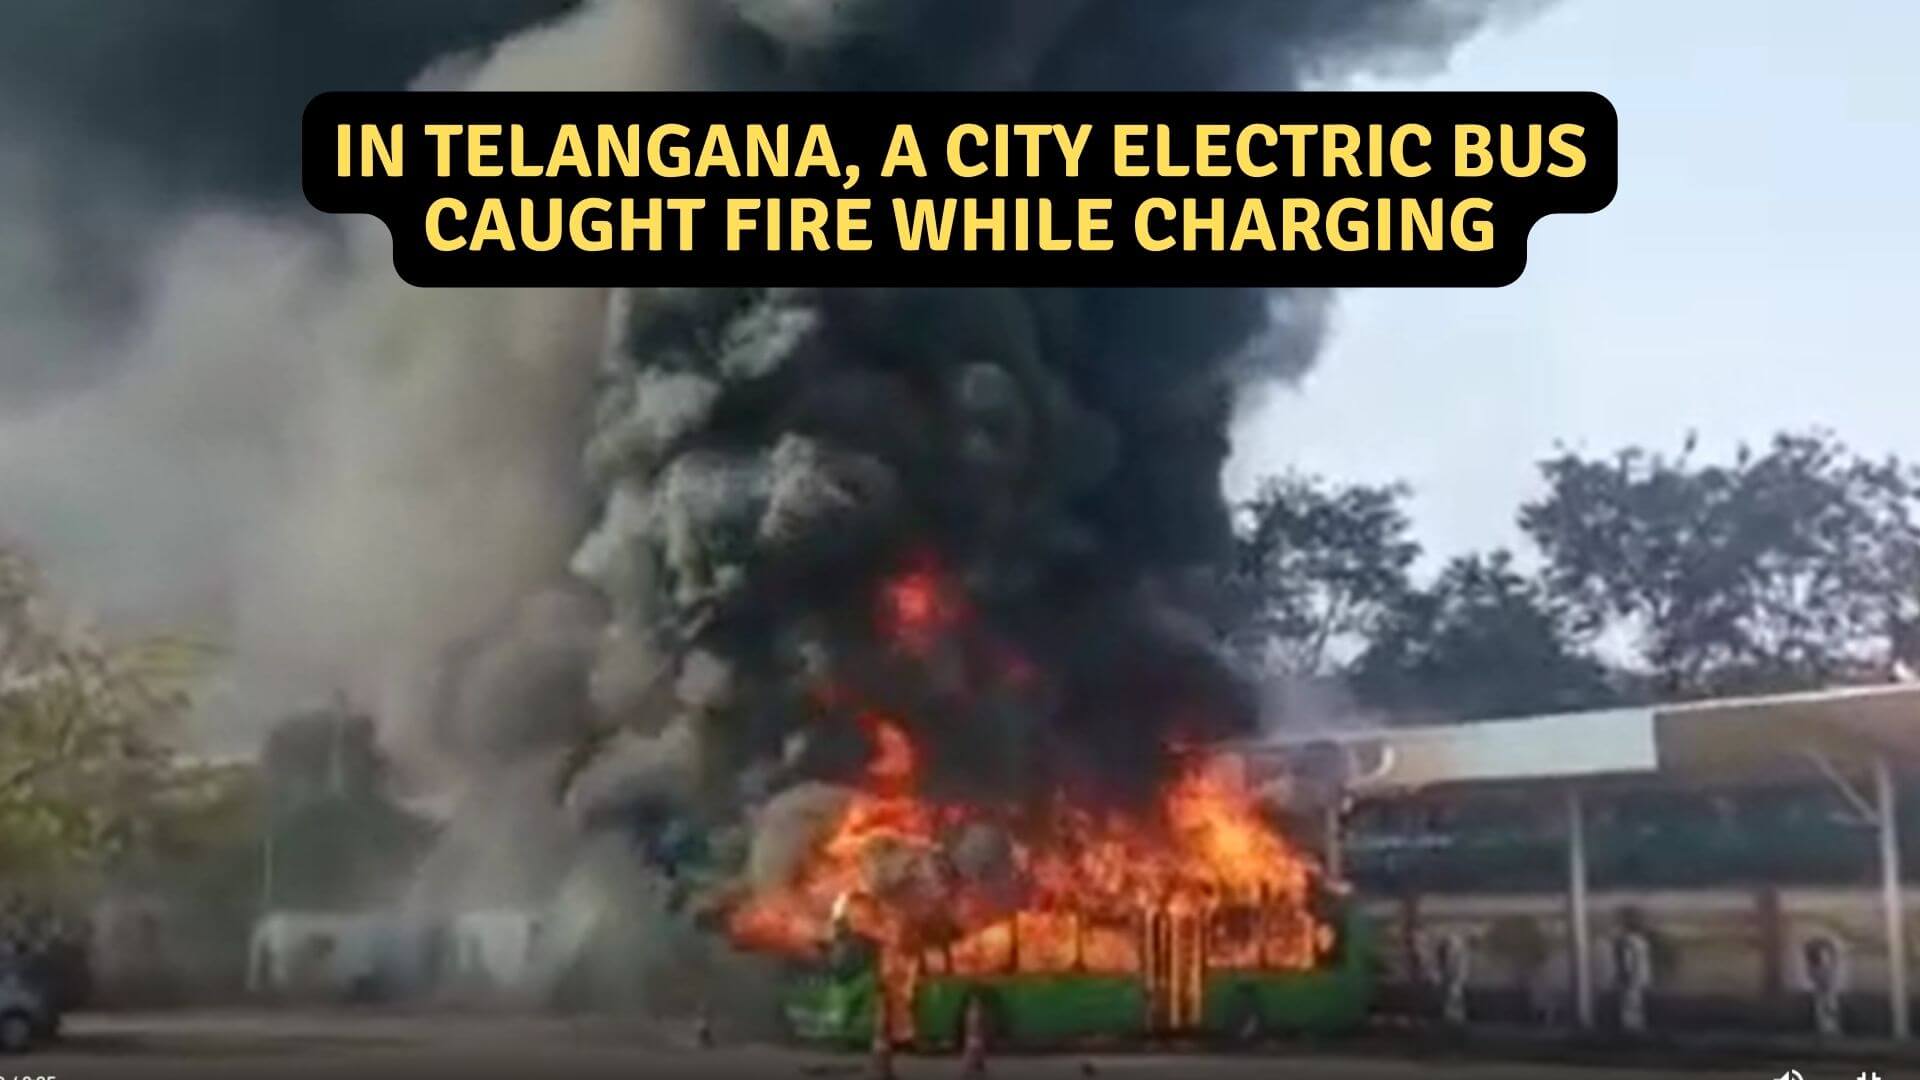 https://e-vehicleinfo.com/byd-city-electric-bus-caught-fire-while-charging-telangana/